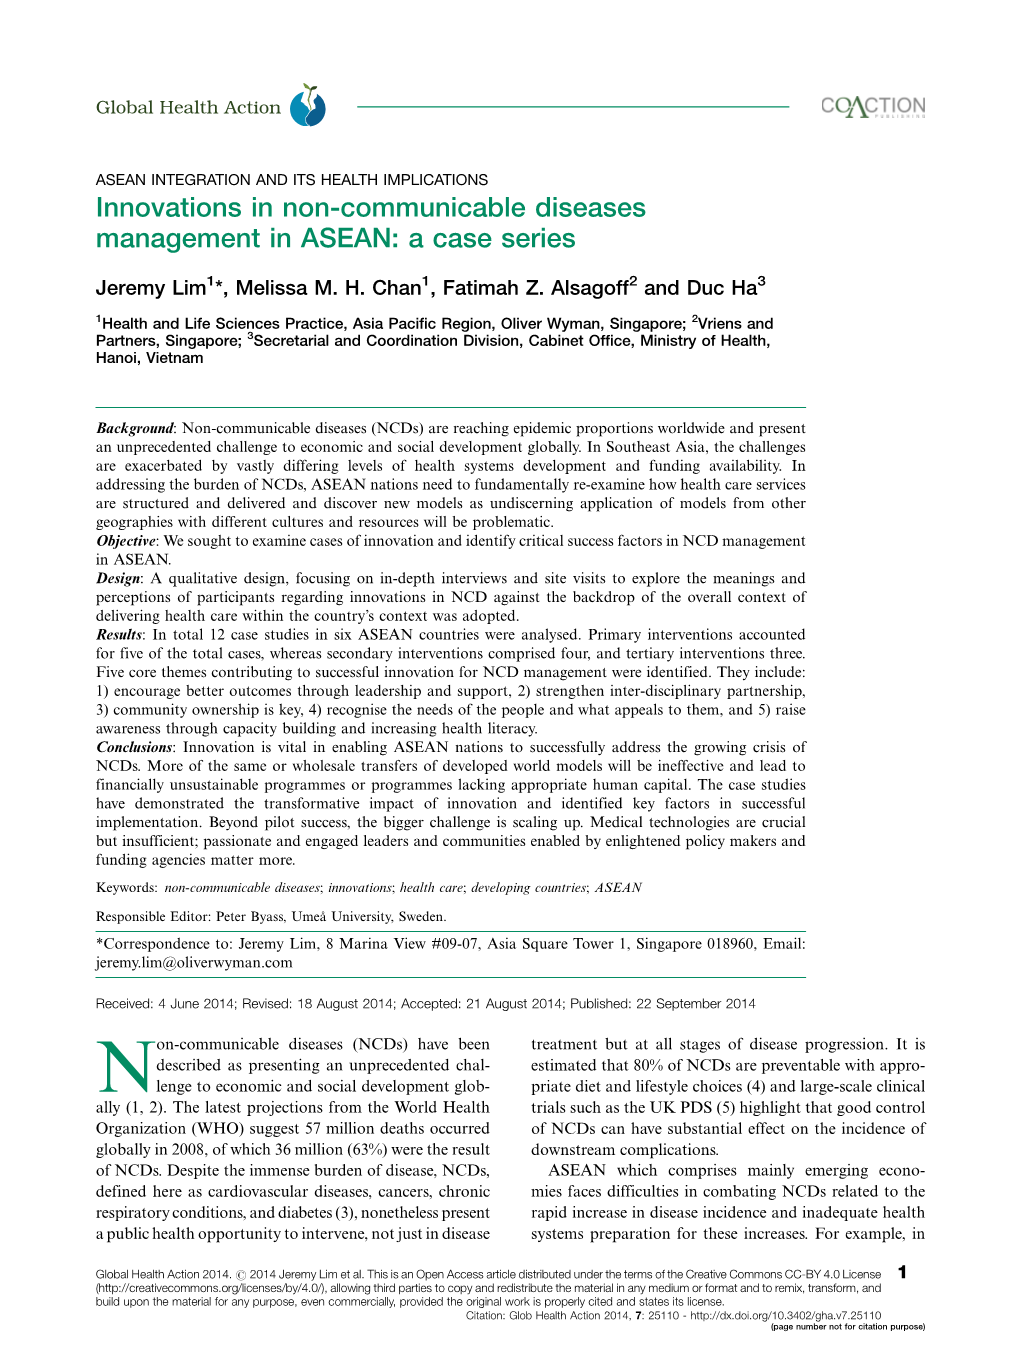 Innovations in Non-Communicable Diseases Management in ASEAN: a Case Series